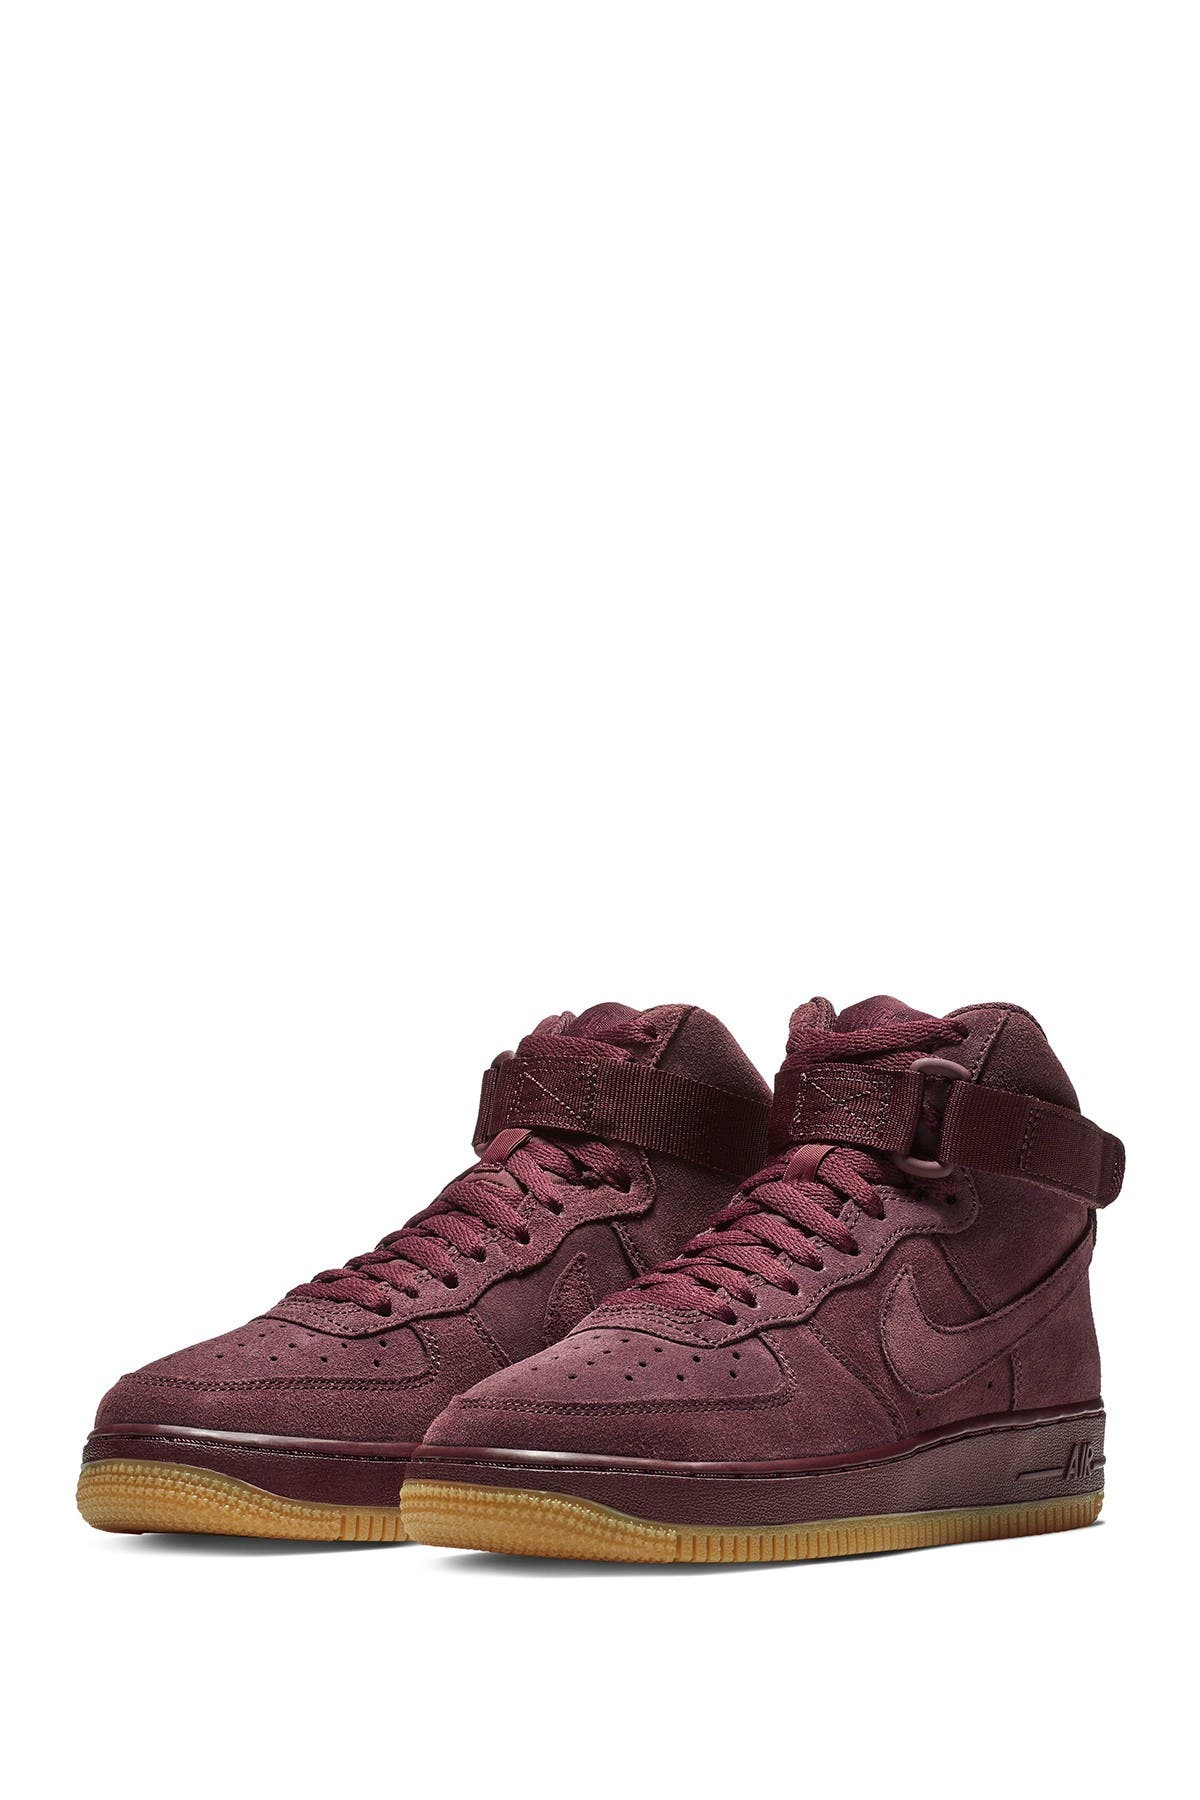 Nike | Air Force 1 Suede High Top 